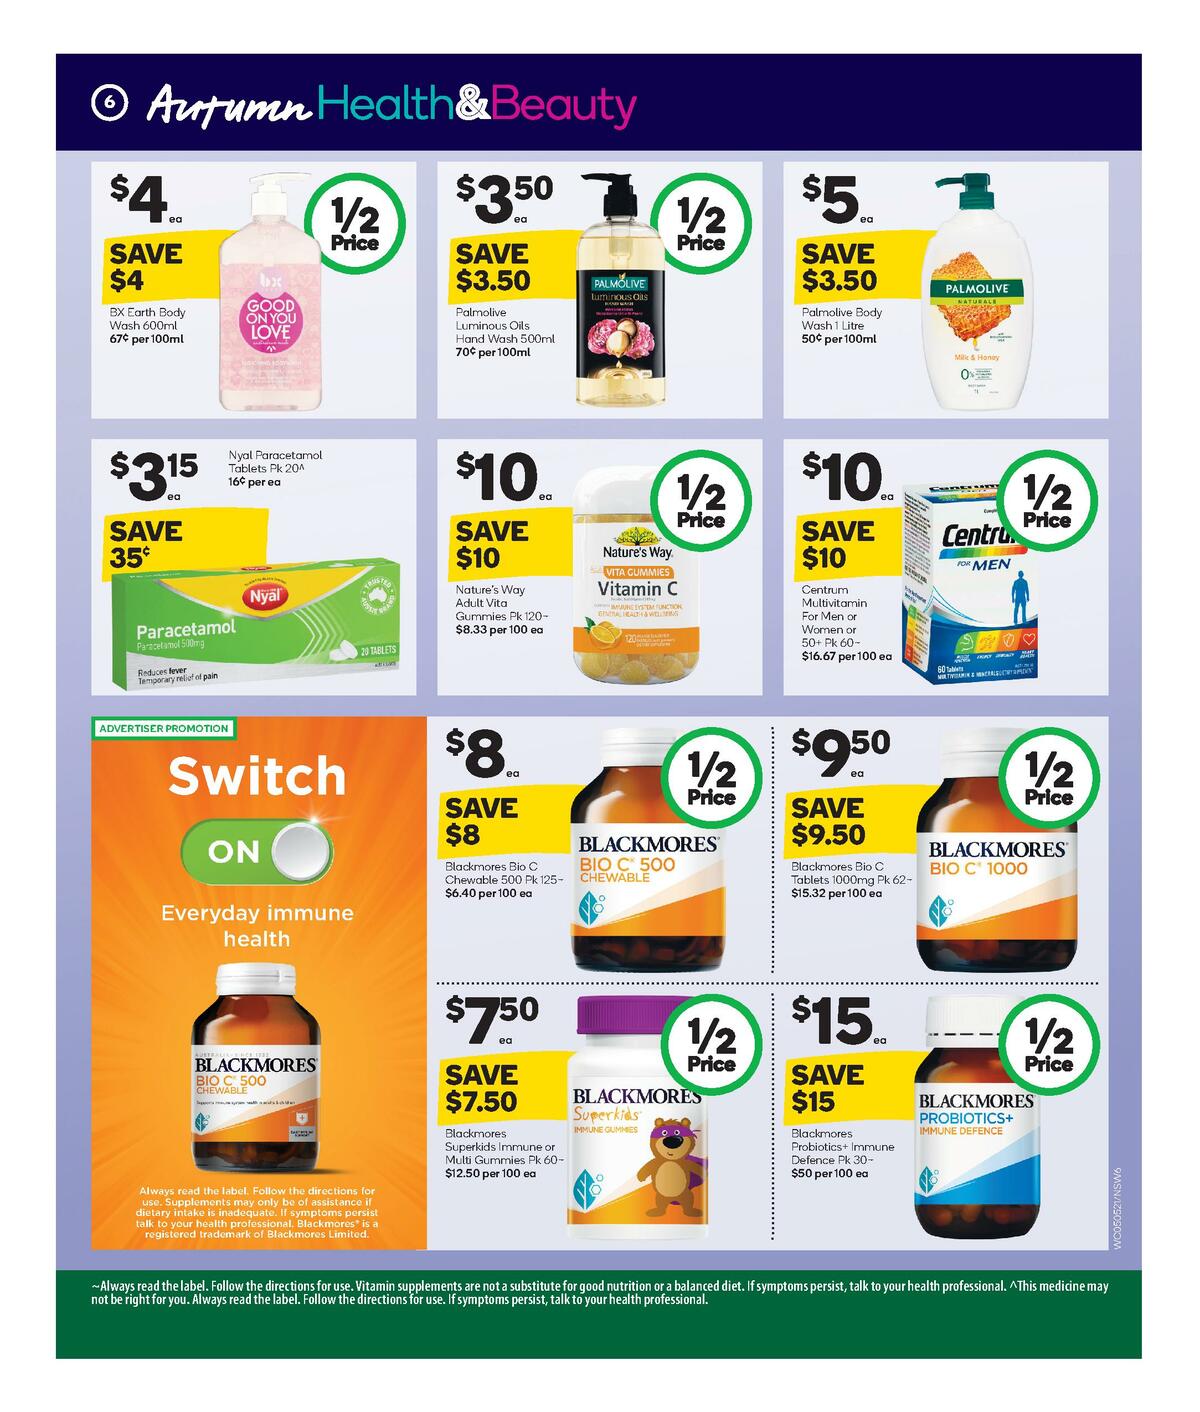 Woolworths Health & Beauty Catalogues from 5 May